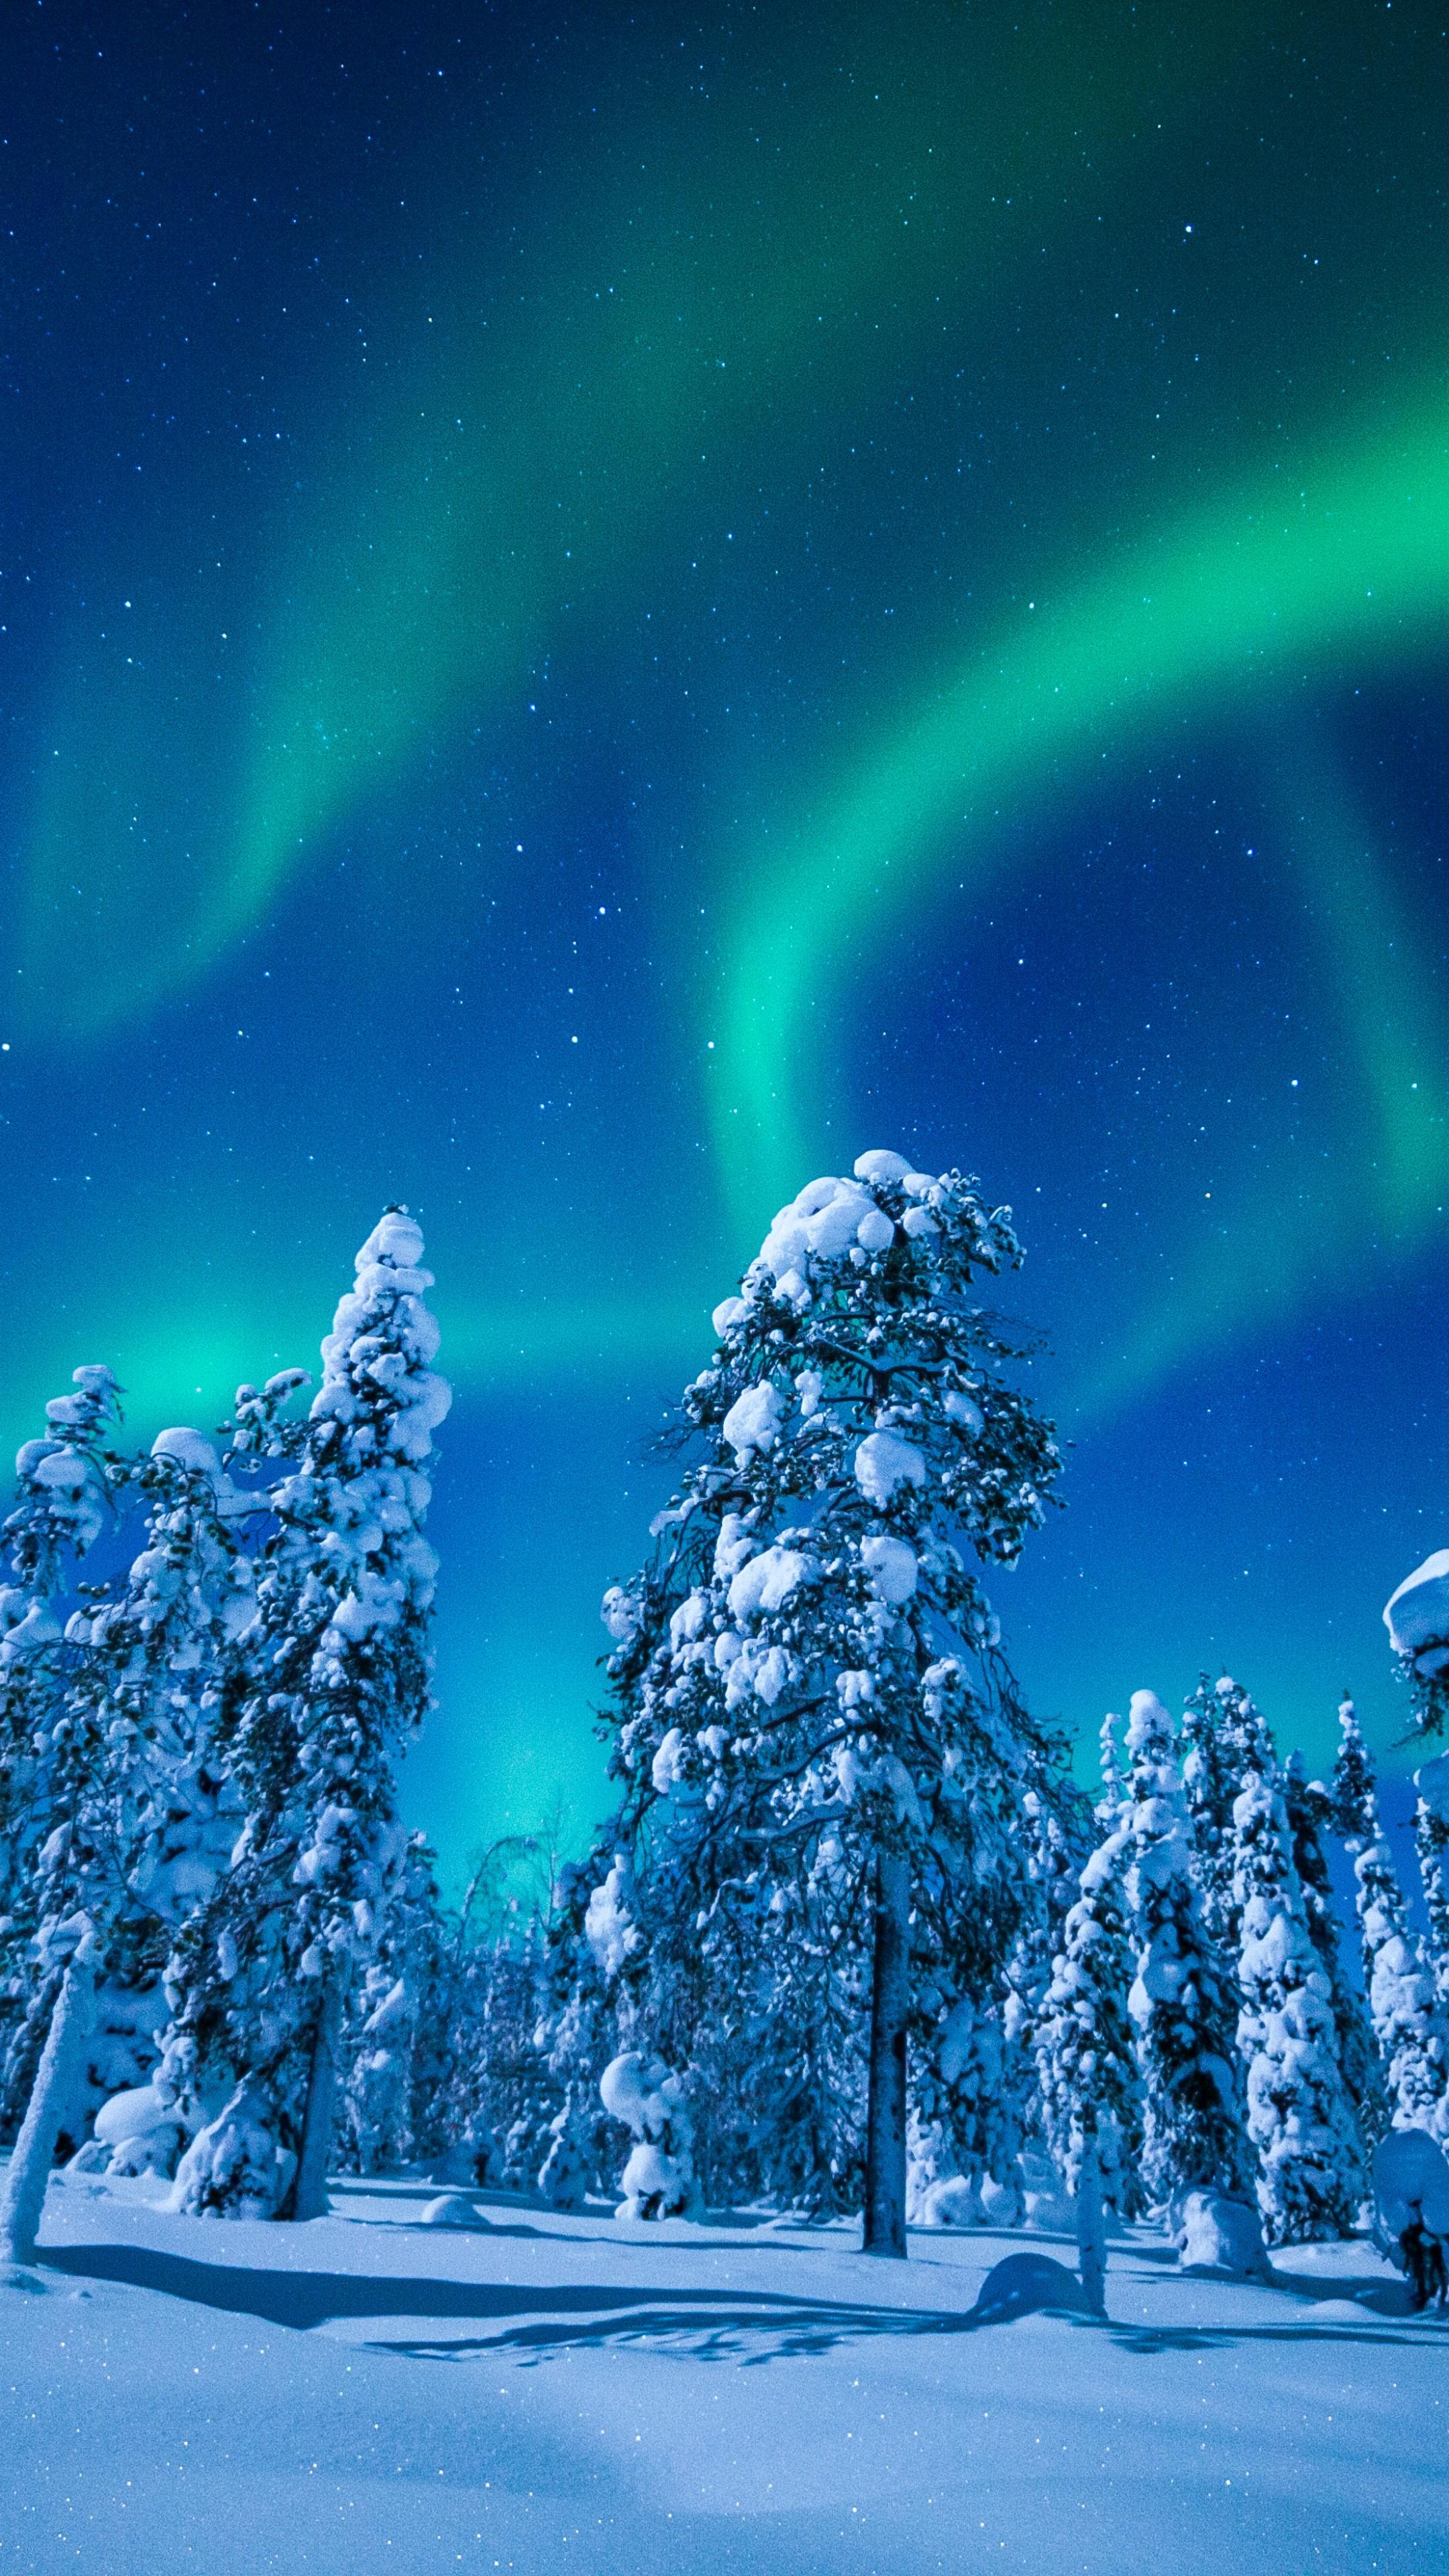 Finland Wallpapers (77+ images inside)